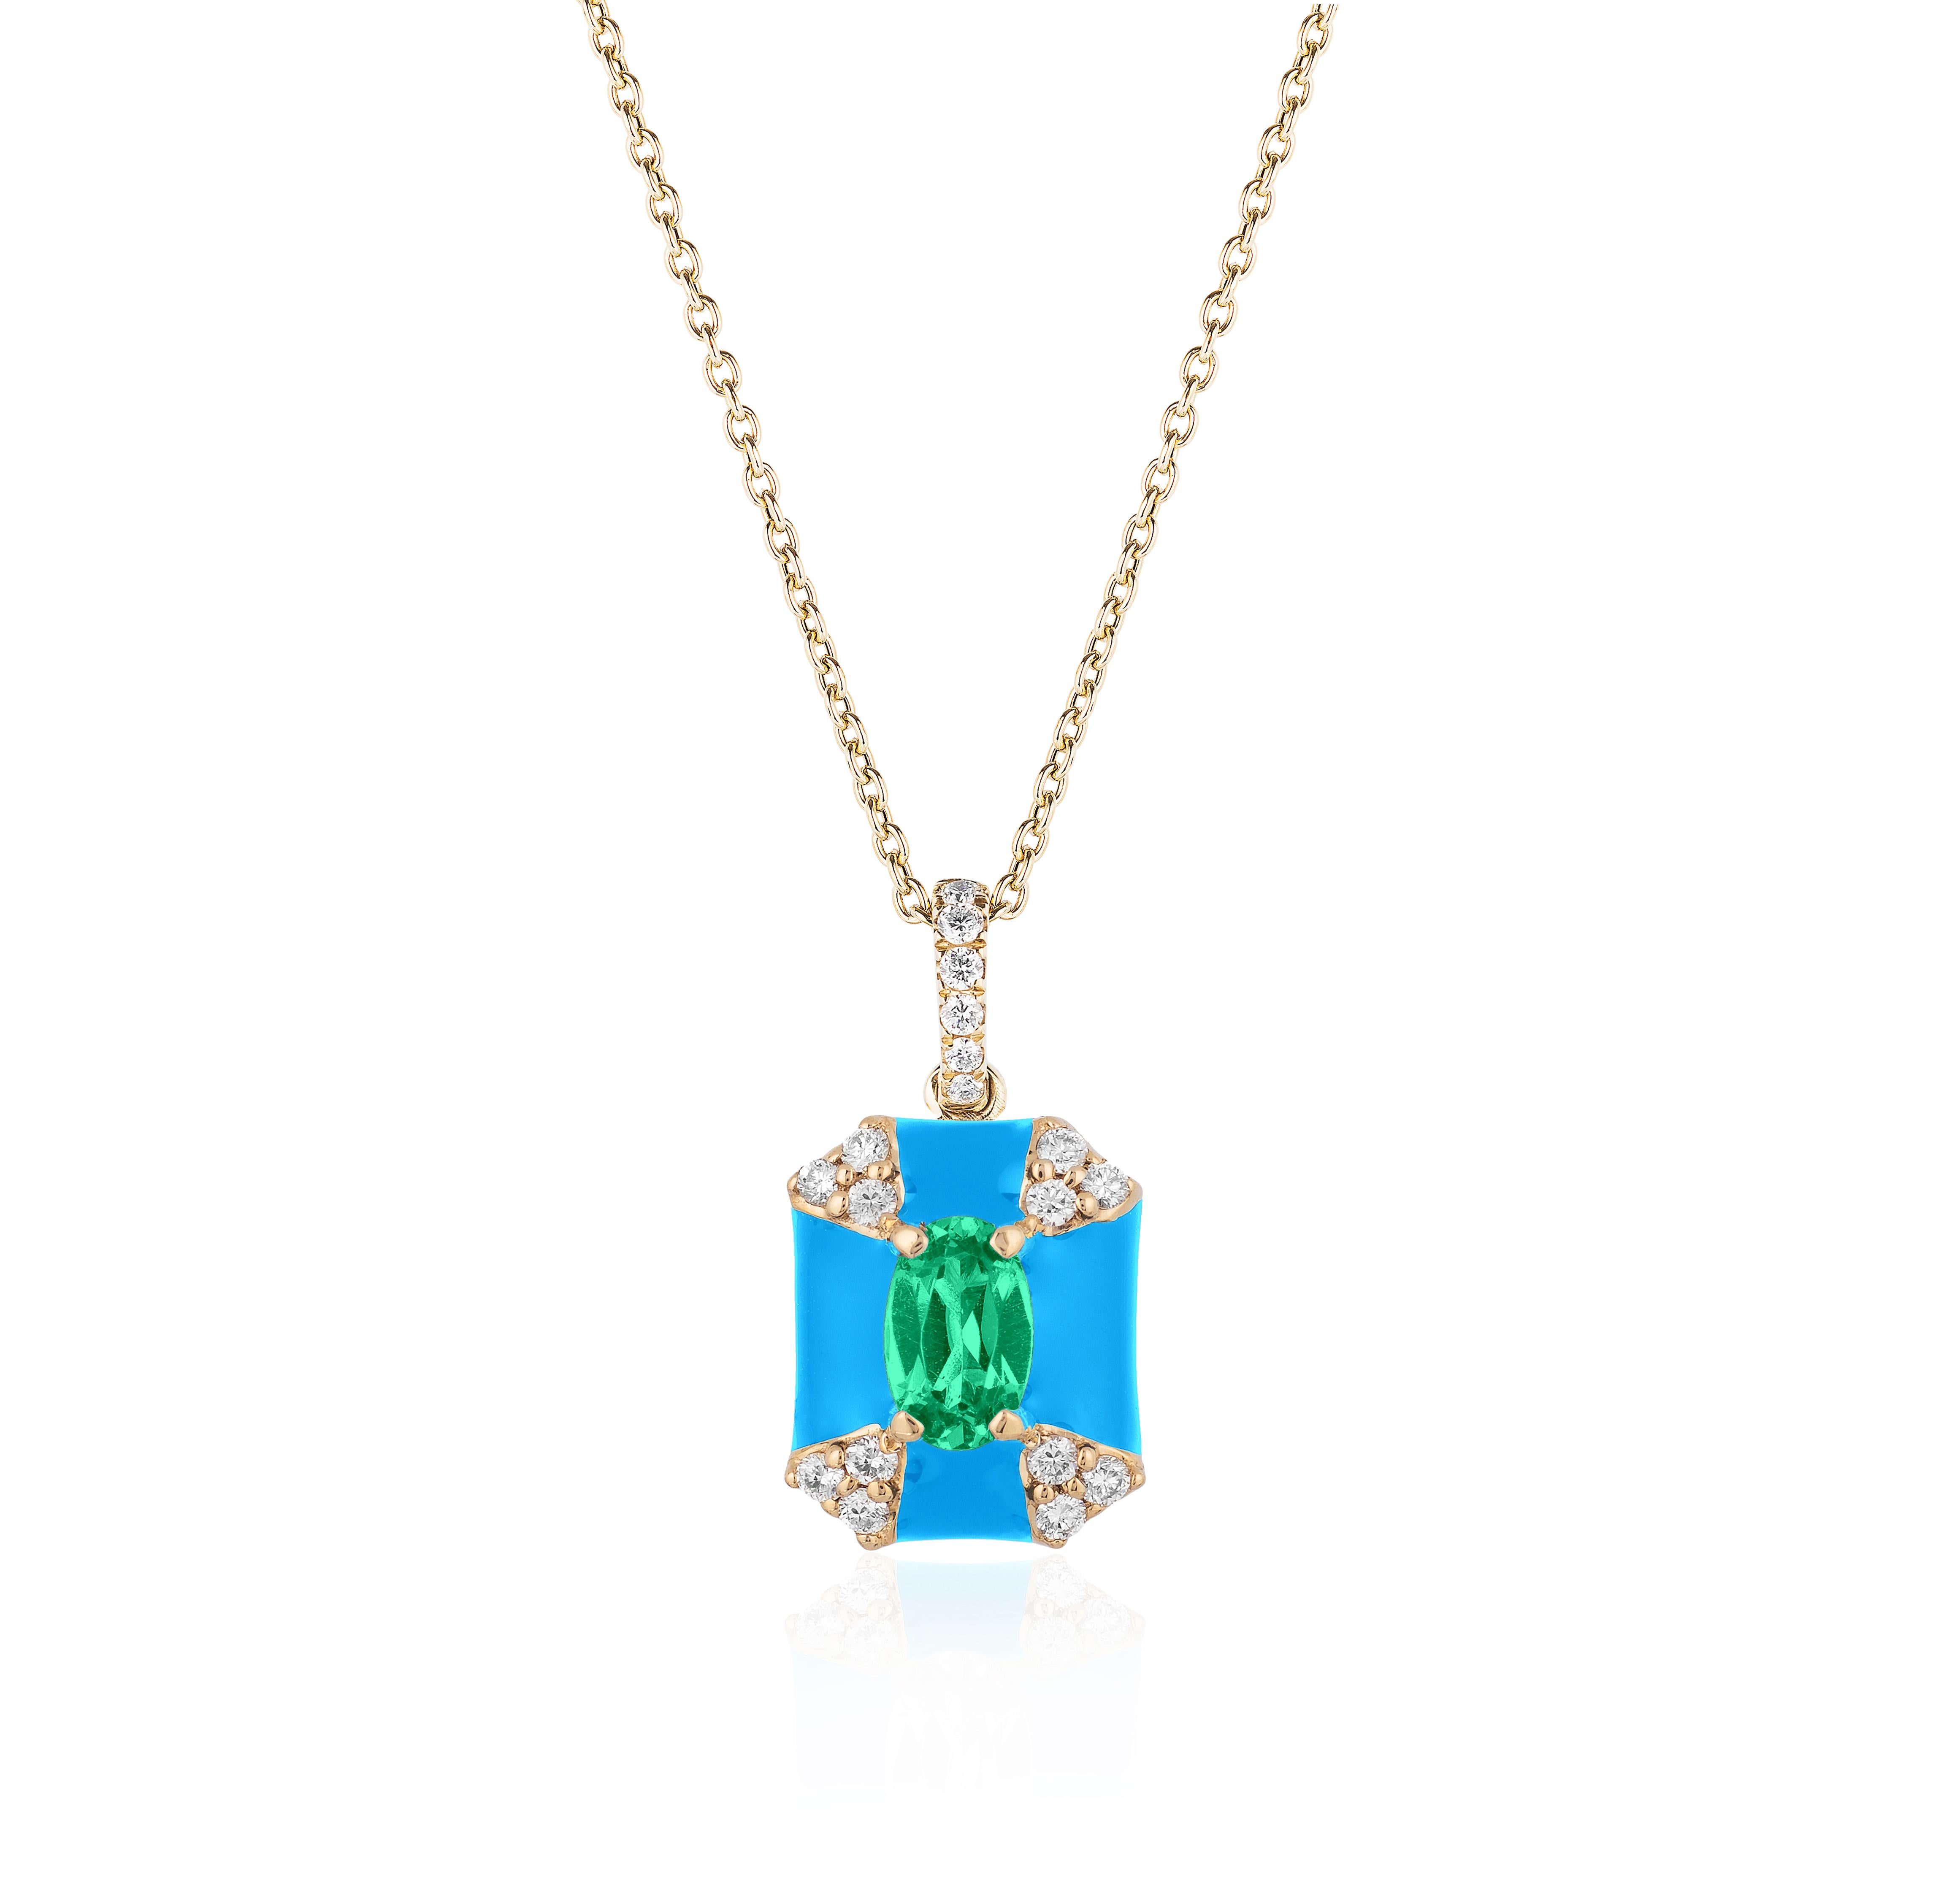 Octagon Turquoise Enamel Pendant with Emerald and Diamonds in 18K Yellow Gold. from ‘Queen’ Collection
Stone Size: 5 x 3 mm 
Gemstone Approx. Stone Wt: 0.20 Carats 
Diamonds: G-H / VS, Approx. Wt: 0.09 Carats